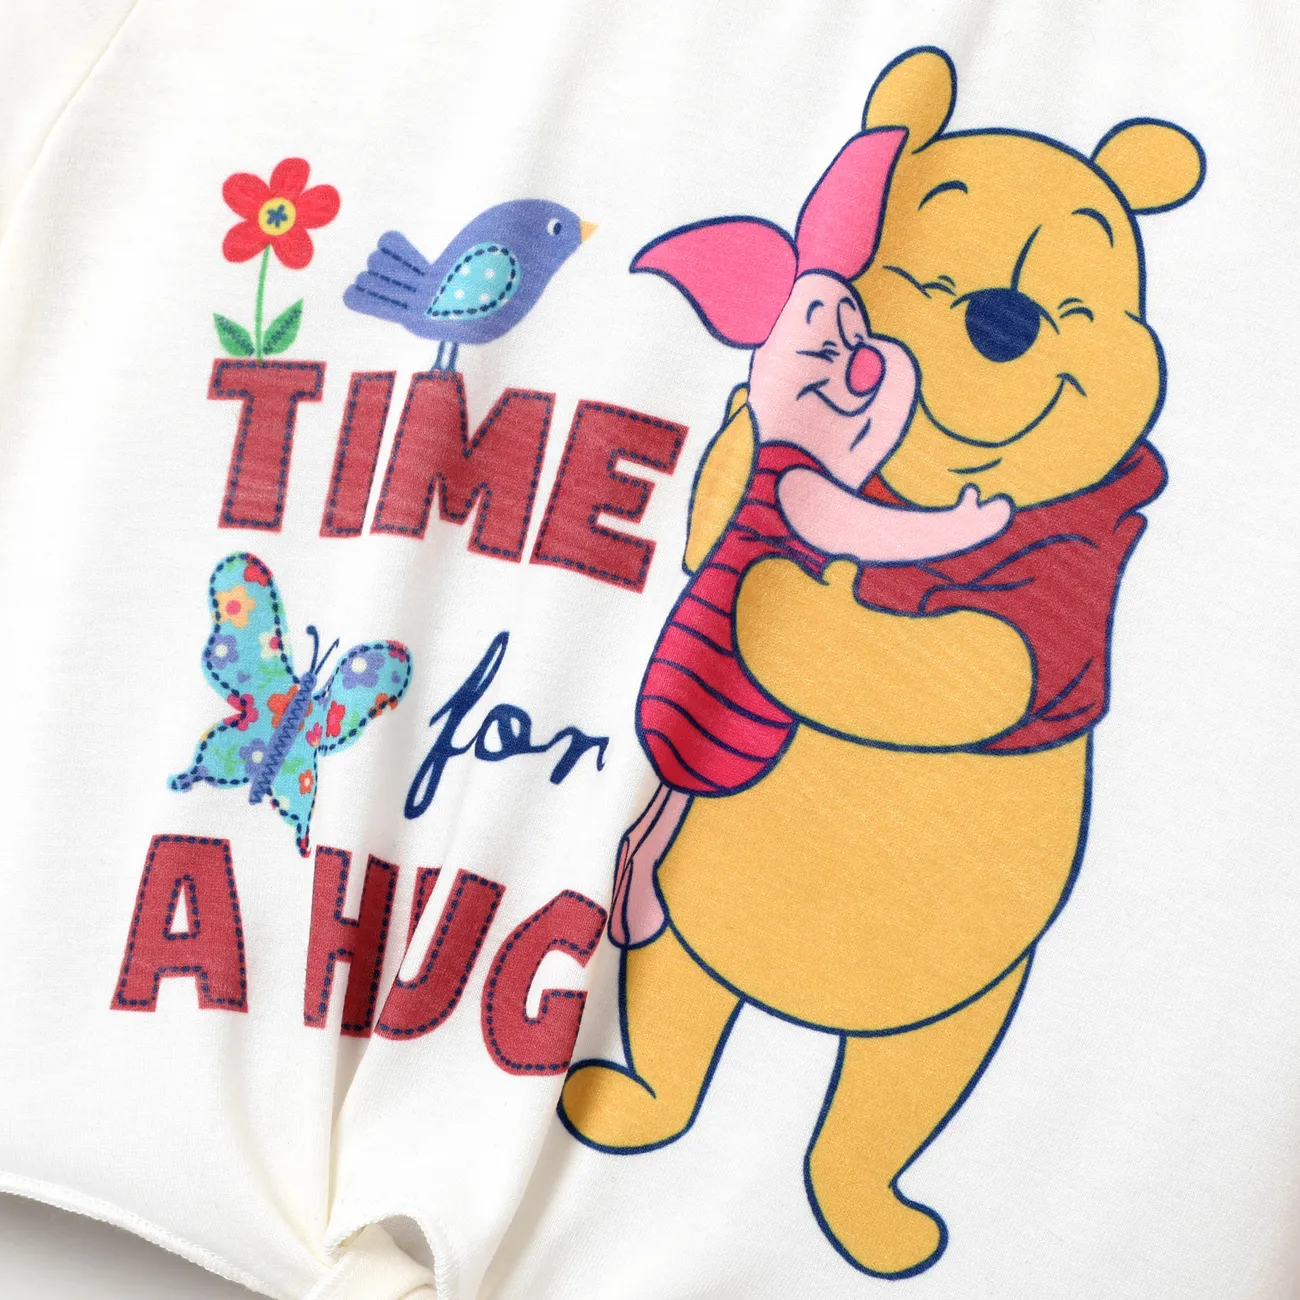 Disney Winnie the Pooh Character Pattern Short-sleeve Top and Plaid Pants  OffWhite big image 1